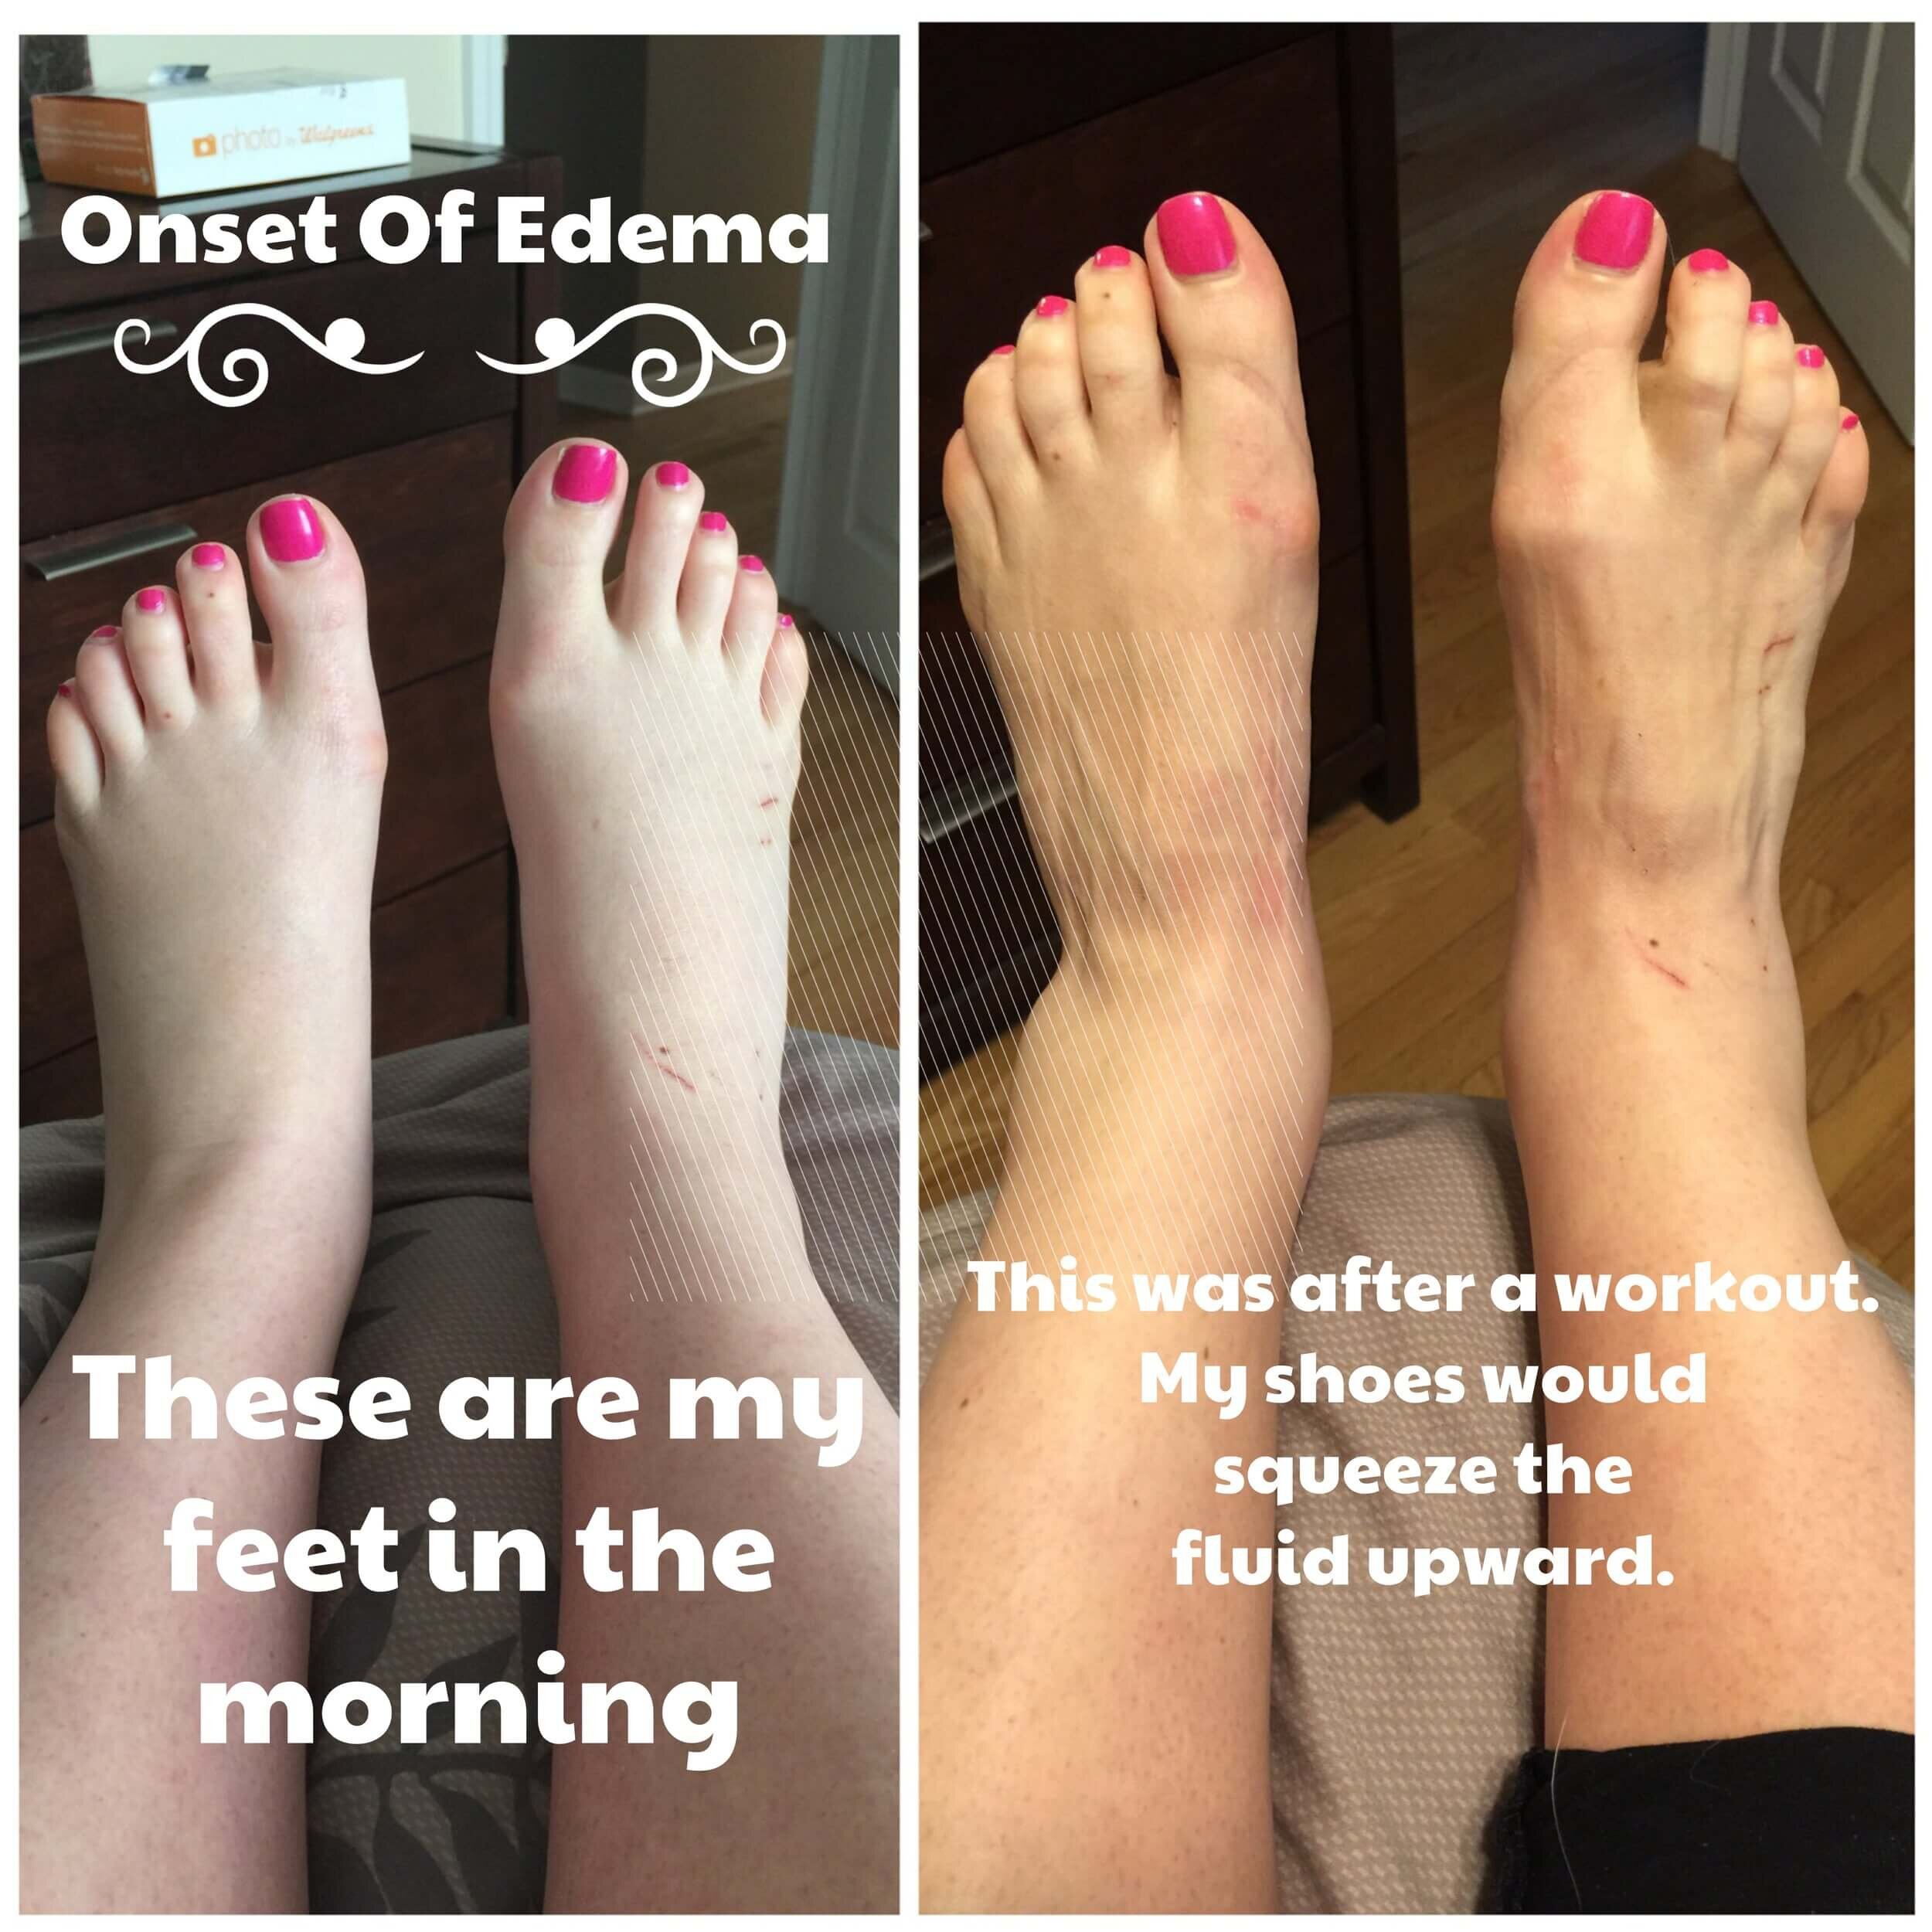 Swollen feet during pregnancy? Check these tips - Sanford Health News